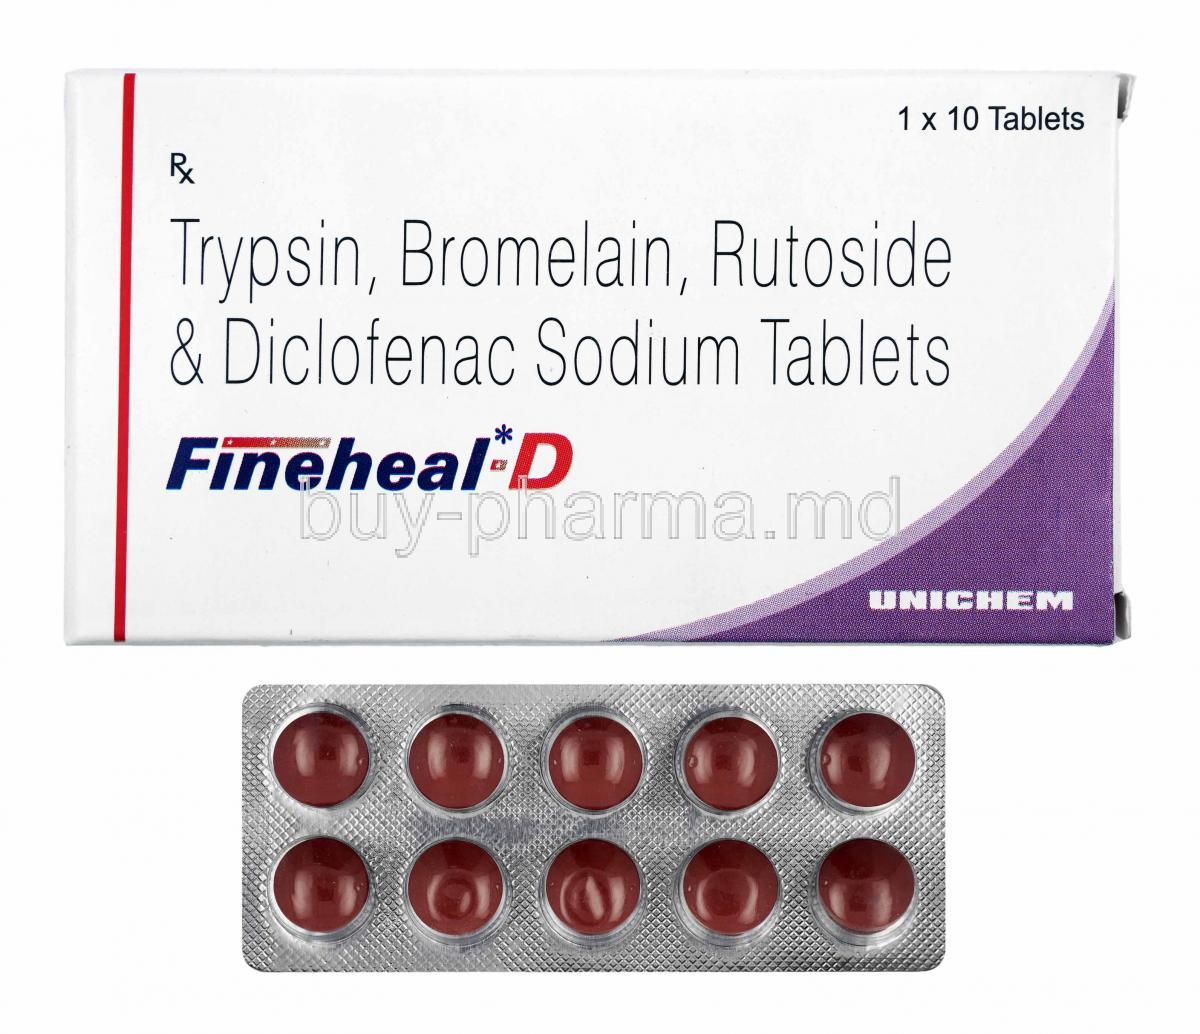 Fineheal-D, Trypsin, Bromelain, Rutoside and Diclofenac box and tablets